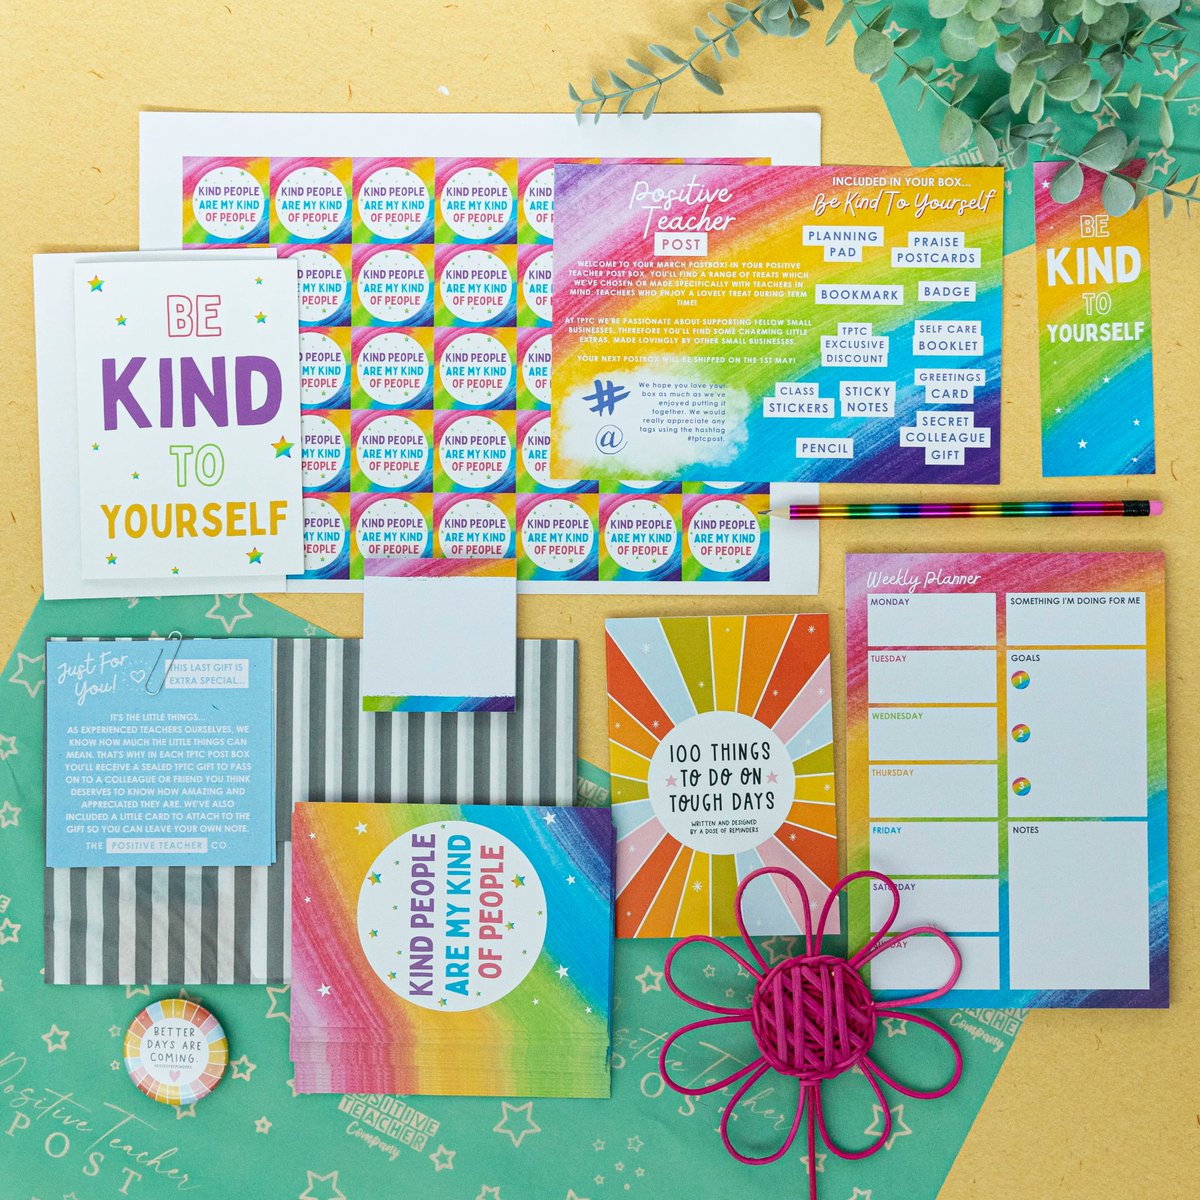 Here's all the contents of our March postbox in one image! Sign up to our May Teacher Postbox here: buff.ly/3AhfR5M for stationery goodies desgined just for you to make you smile. #HappyTeachers #TeacherStationery #Teacherwellbeing